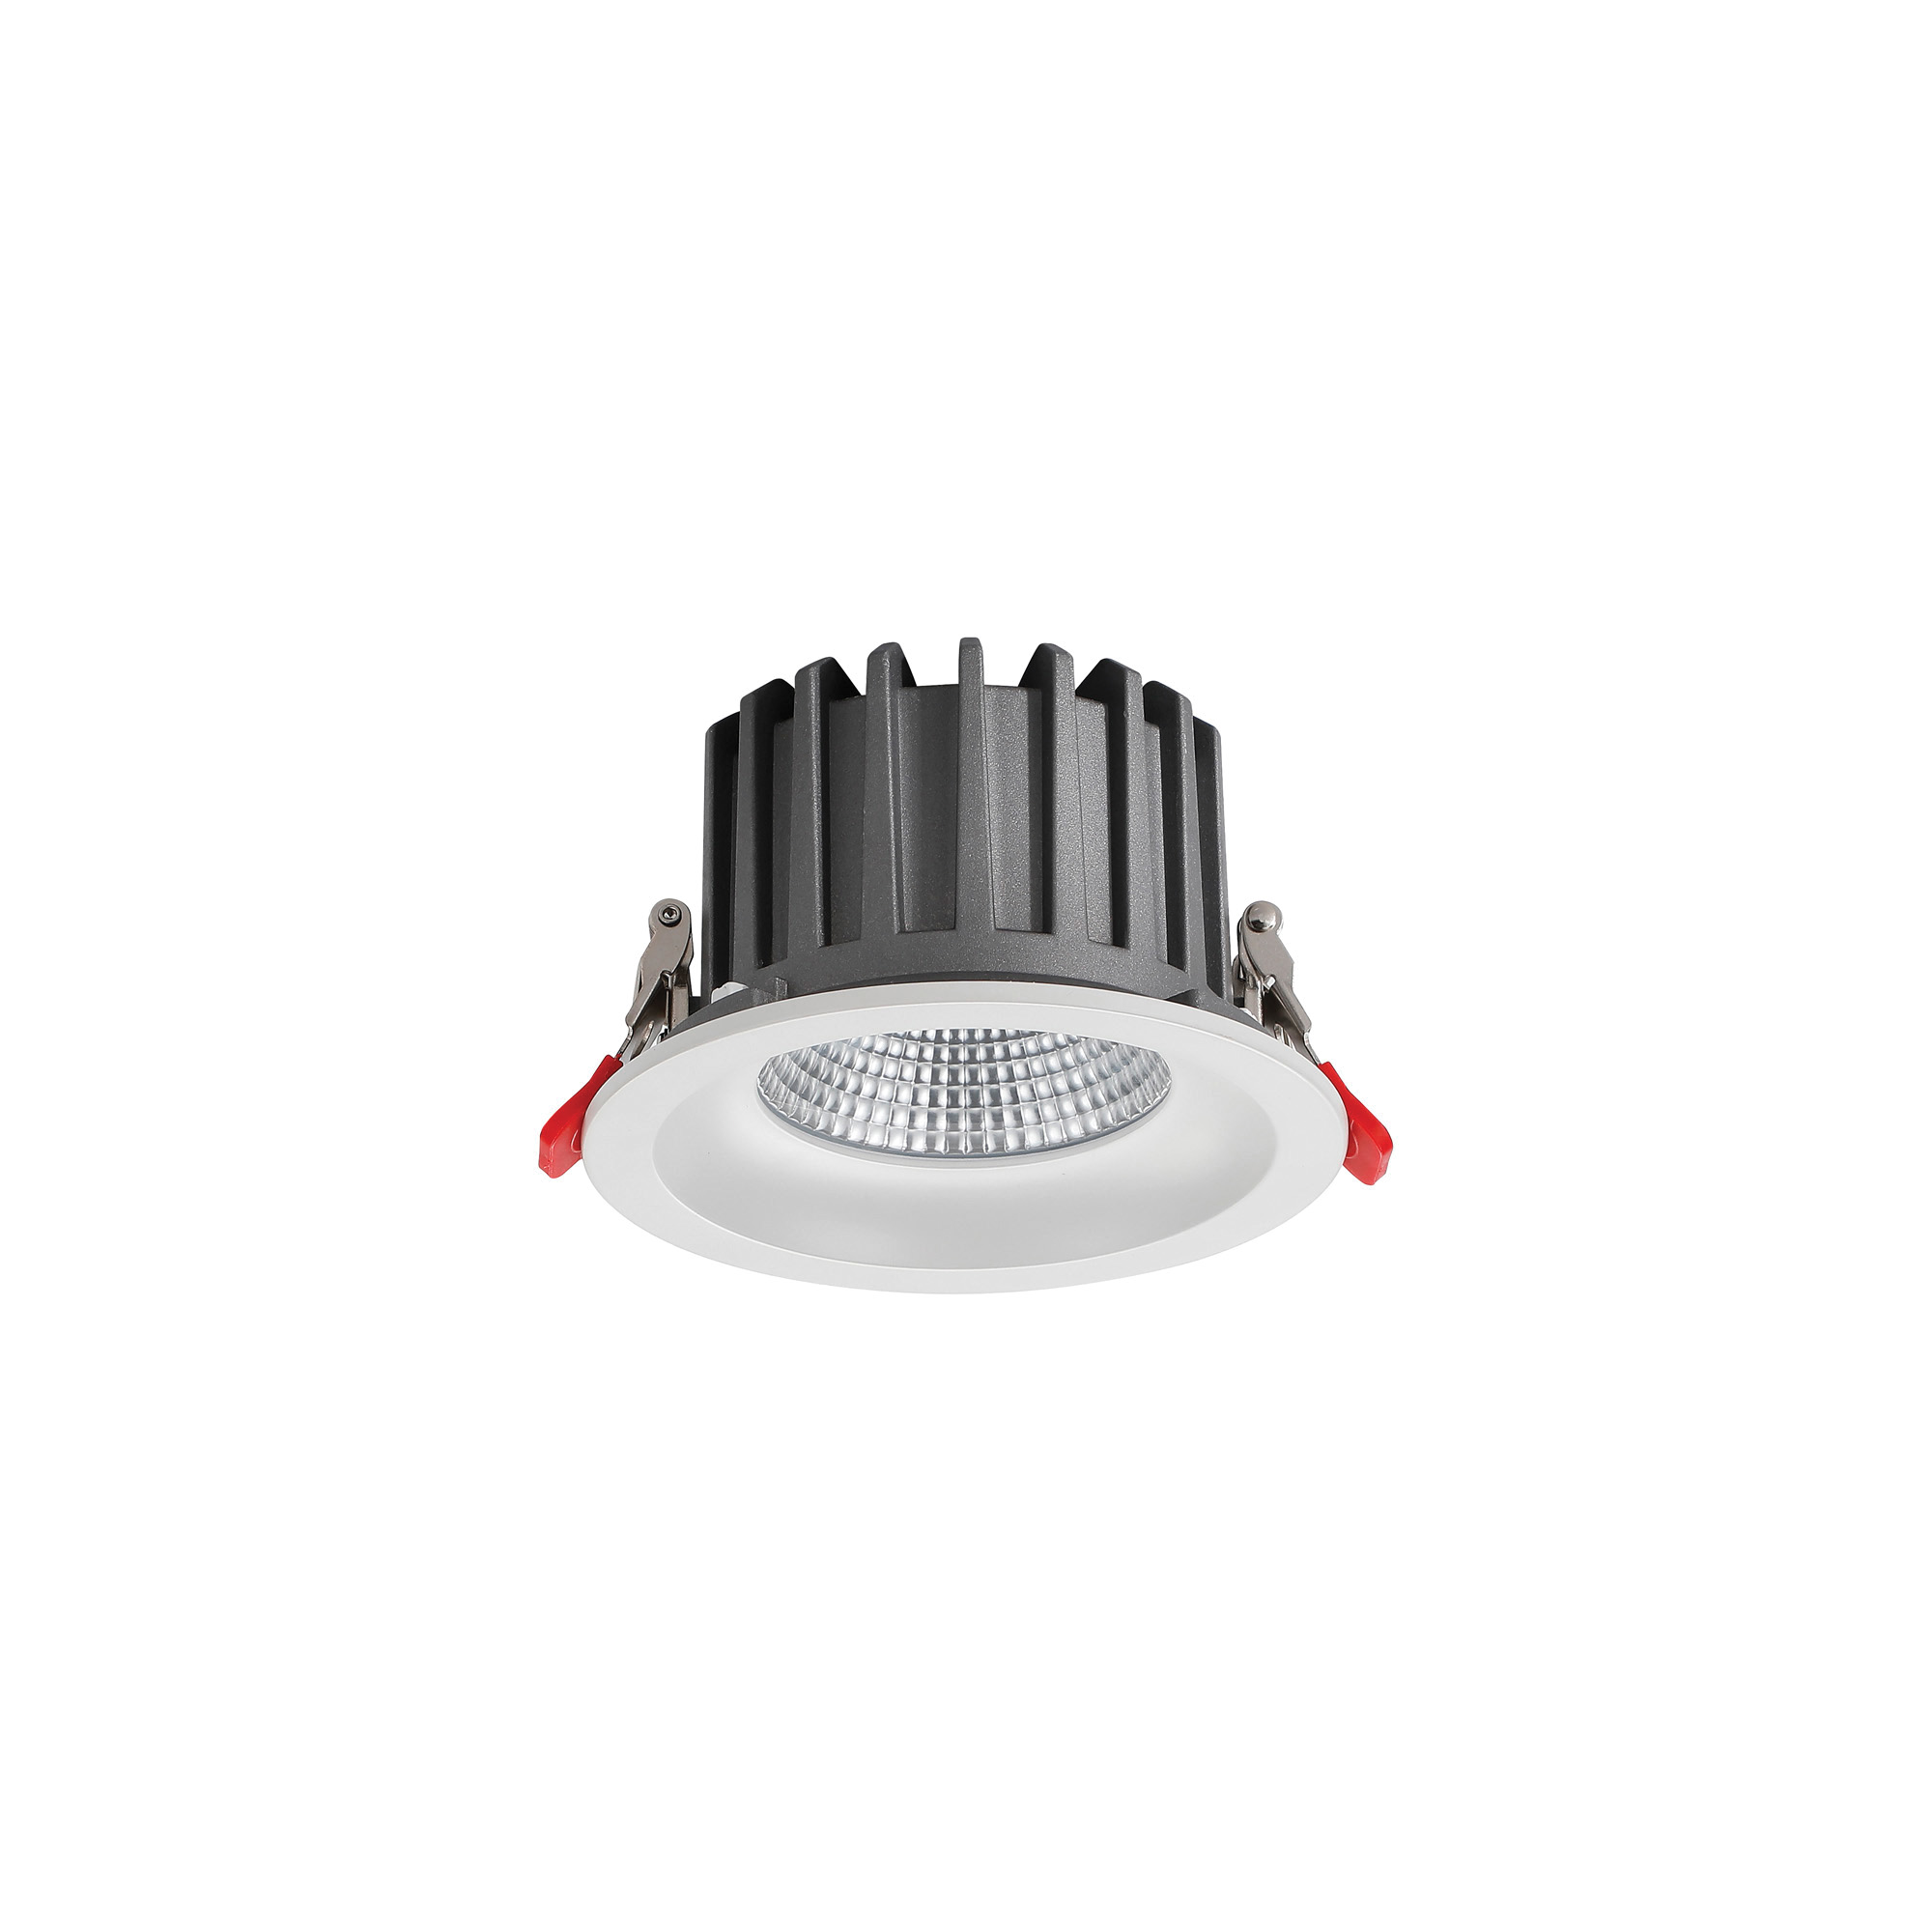 DL200057  Bionic 15; 15W; 350mA; White Deep Round Recessed Downlight; 1200lm ;Cut Out 120mm; 40° ; 5000K; IP44; DRIVER INC.; 5yrs Warranty.